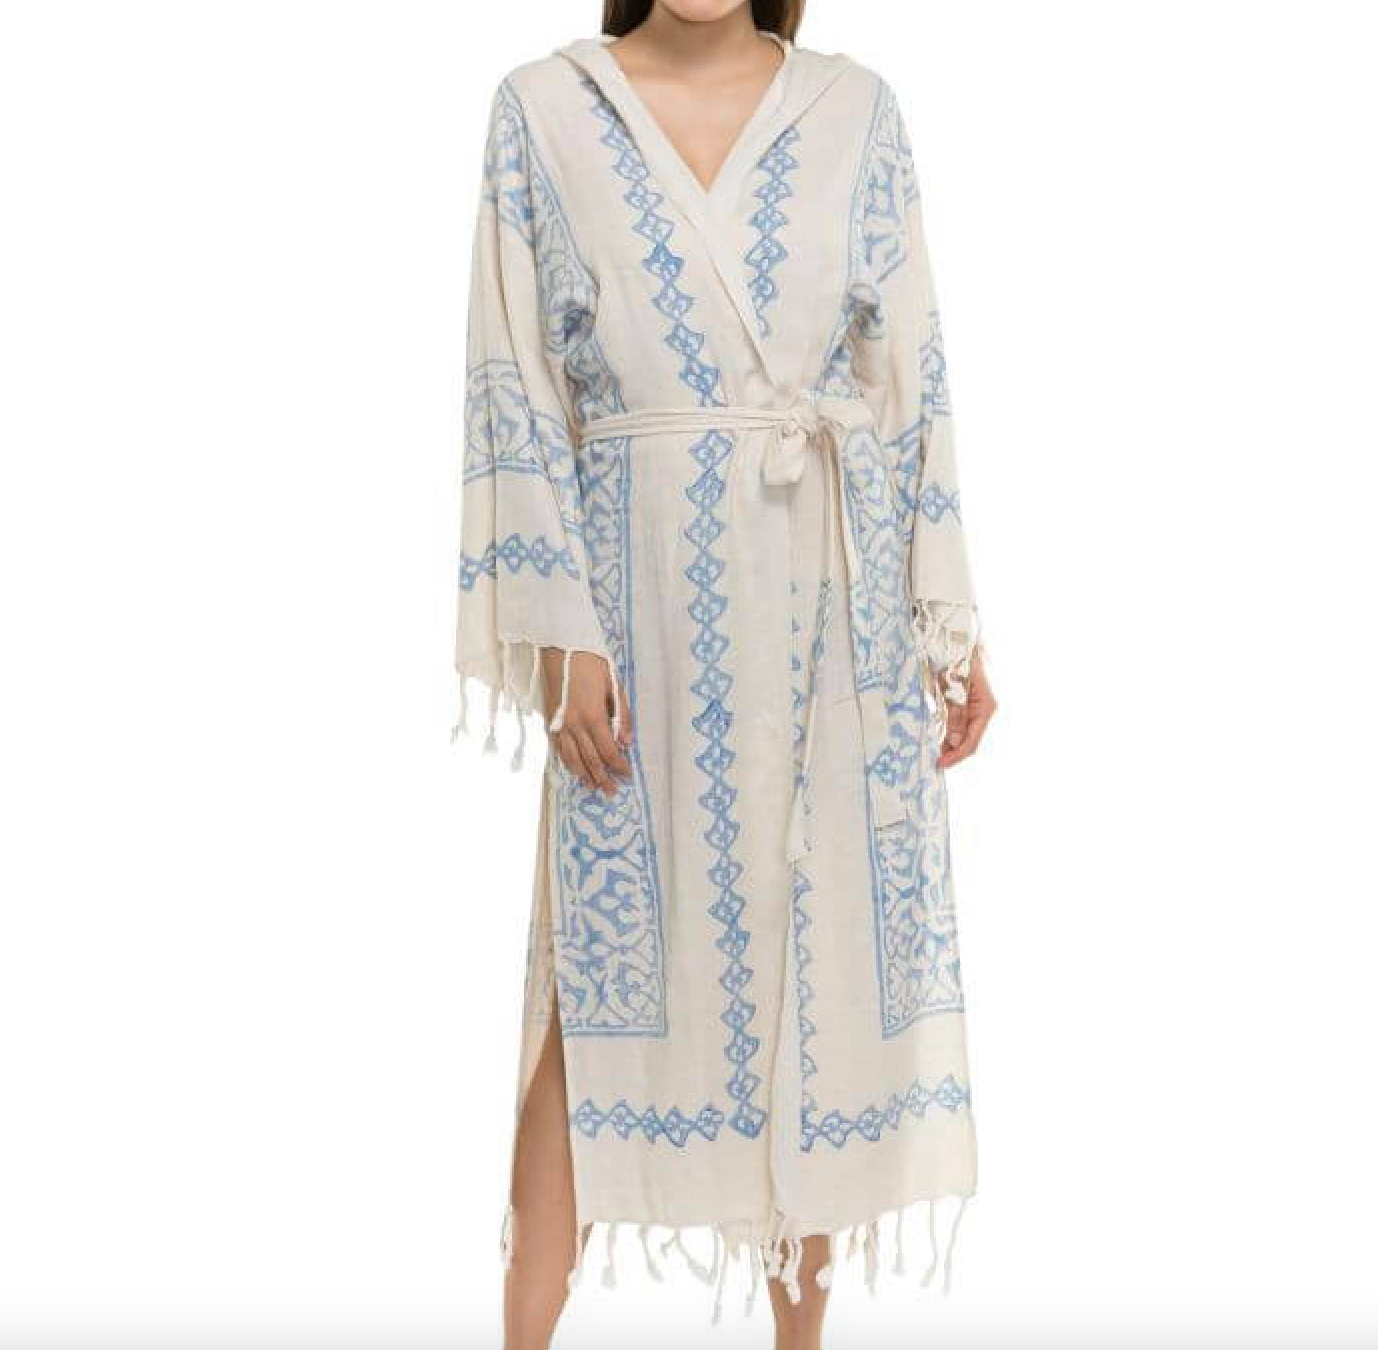 Hand printed Turkish linen and cotton robes by Buldano